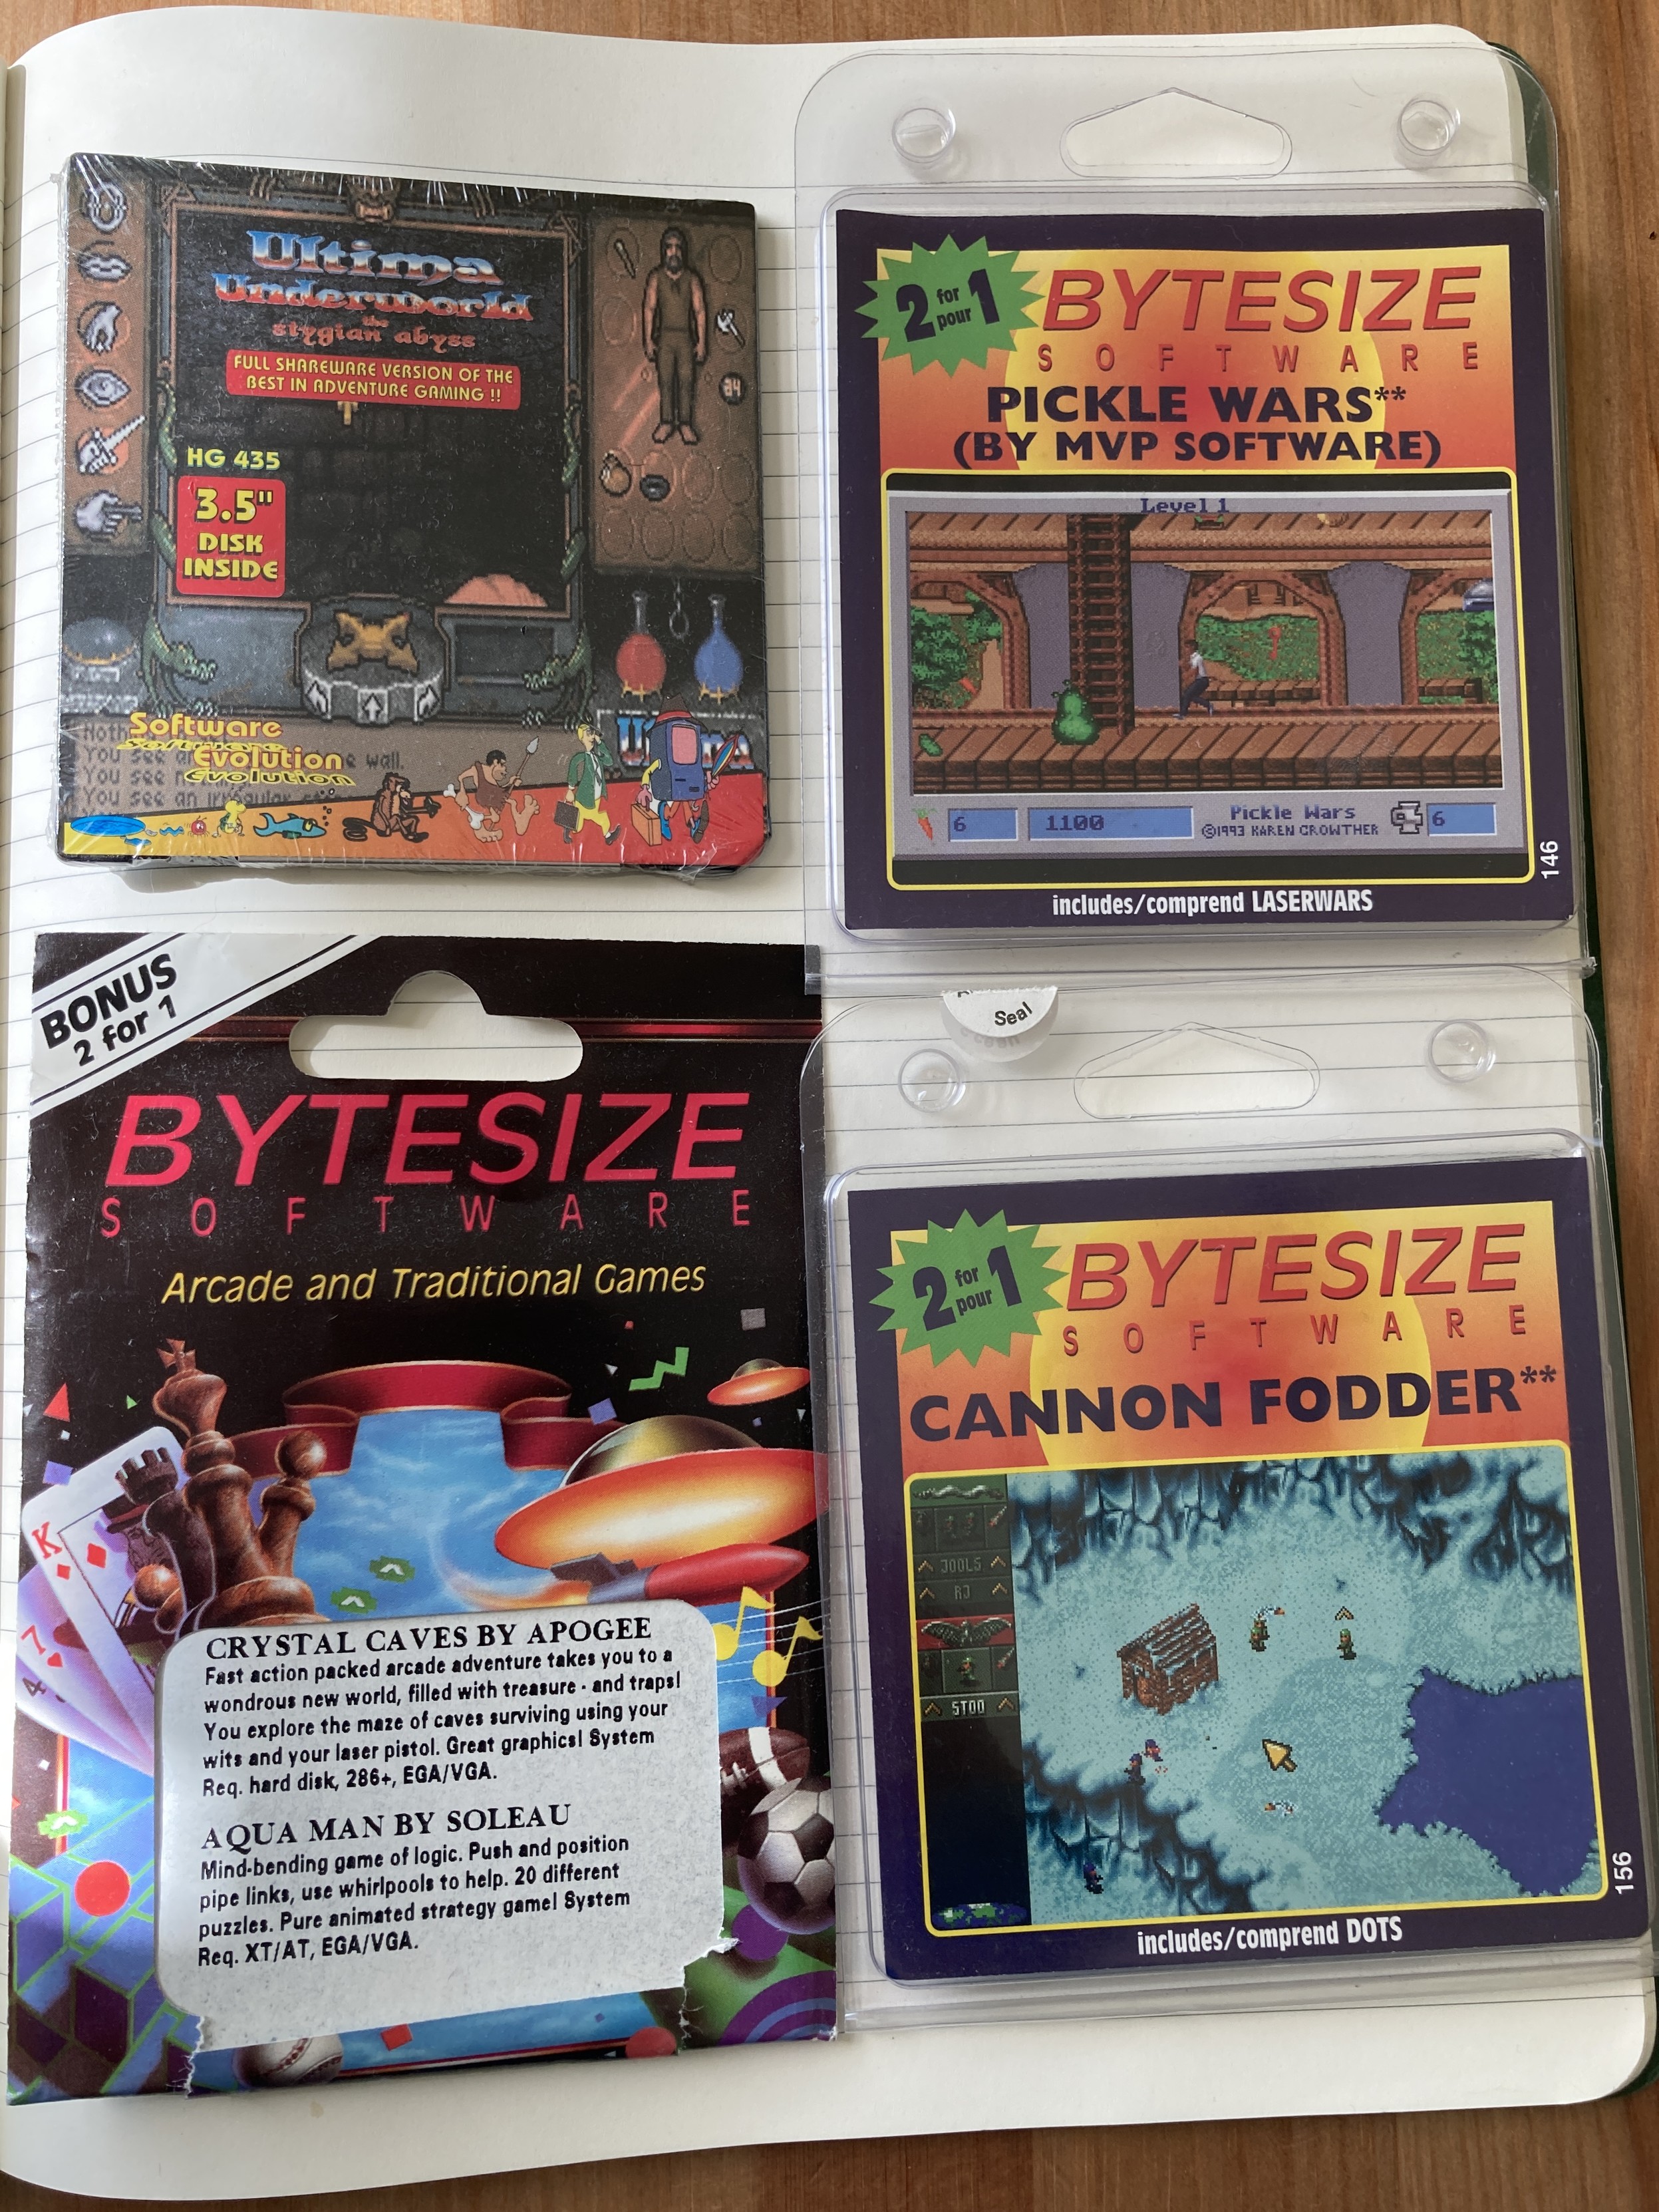 A photo of four shareware diskettes.

Clockwise, from top left:

Ultima Underworld Demo (Origin Systems)

Pickle Wars (MVP Software)

Crystal Caves (Apogee) and Aqua Man (Soleau)

Cannon Fodder (Sensible Software)